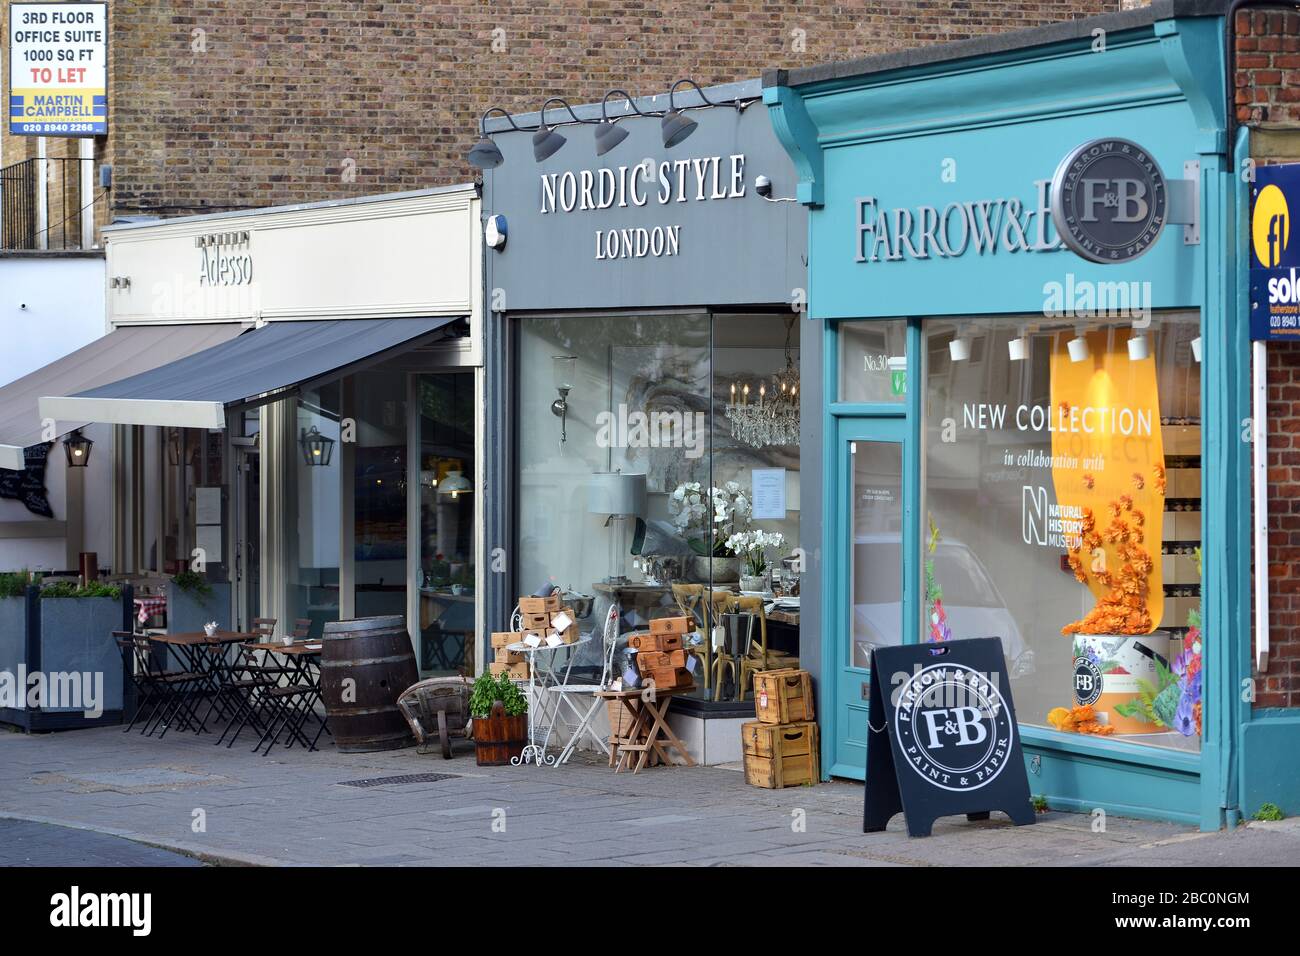 Shops and cafes on Richmond Hill, Richmond, London, UK. Farrow & Ball, Nordic Style. Stock Photo